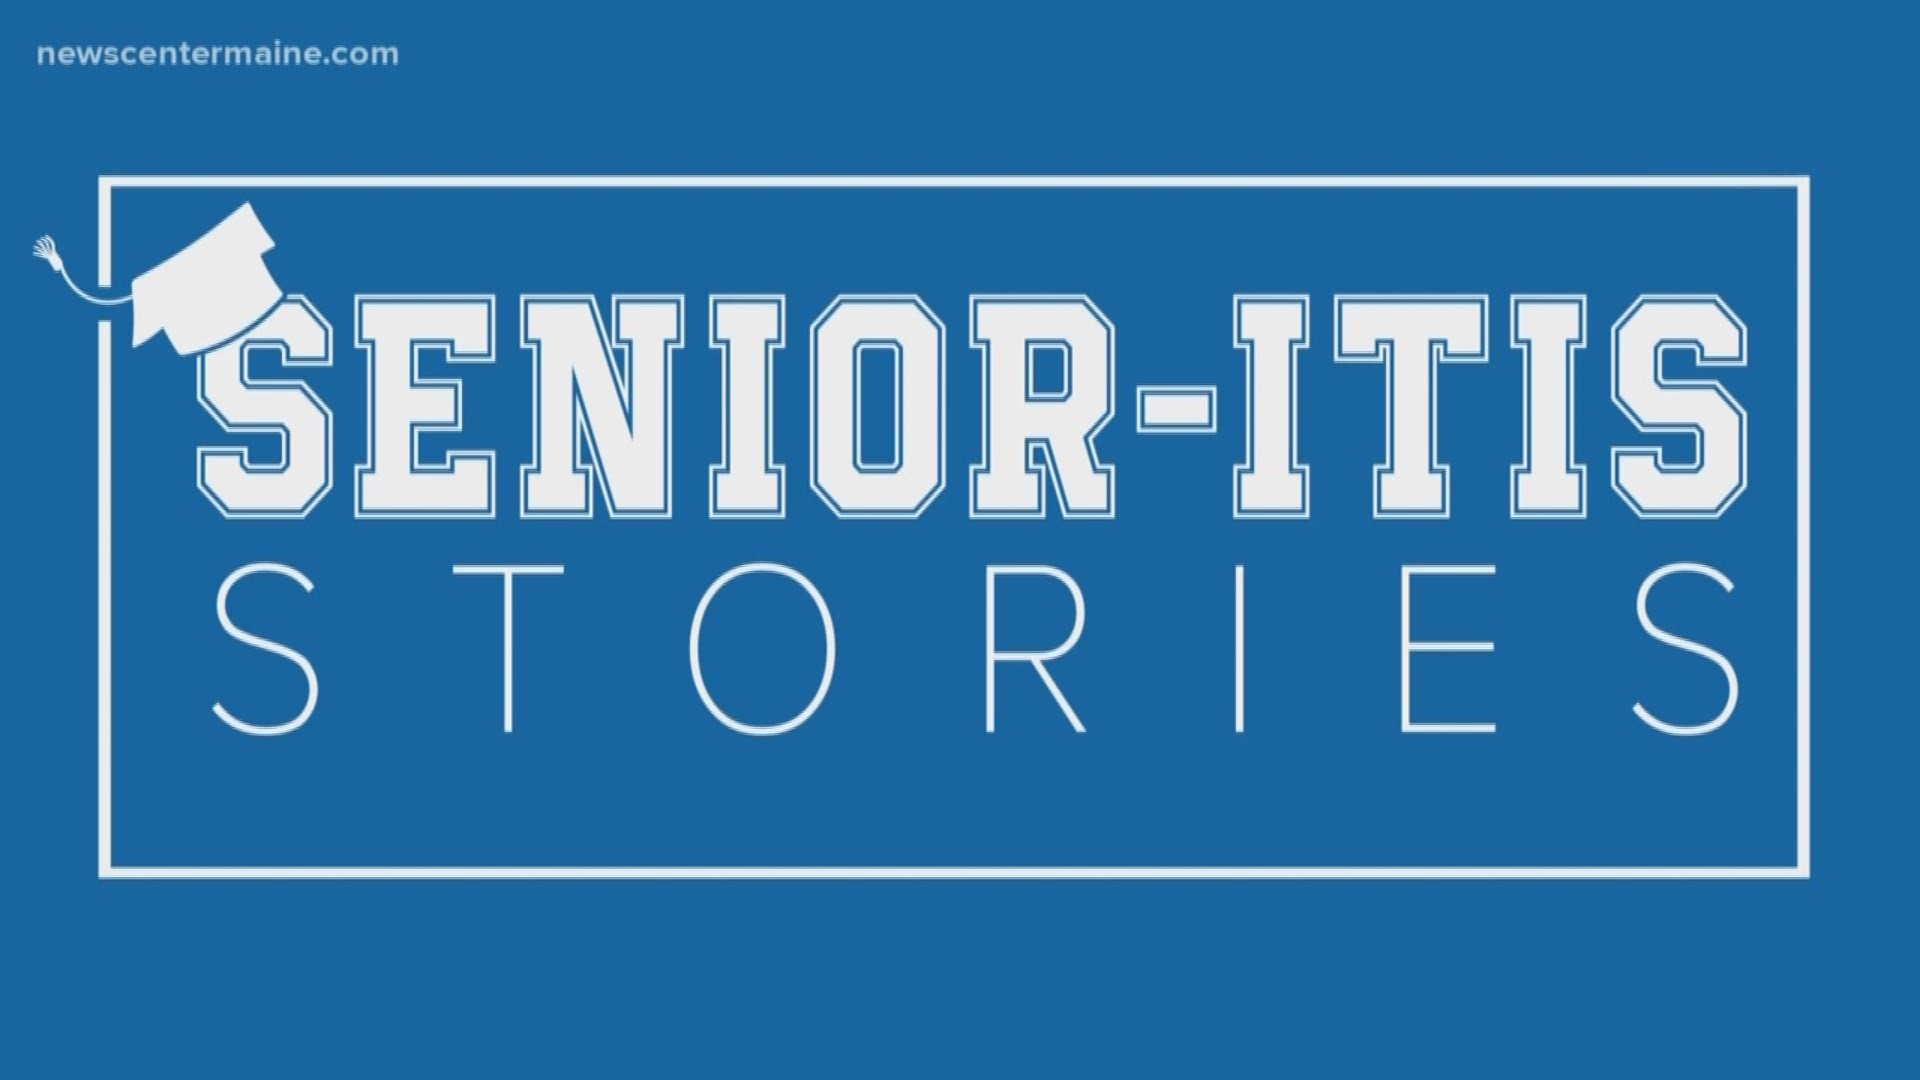 Senioritis Stories: What it's like to be a senior in college